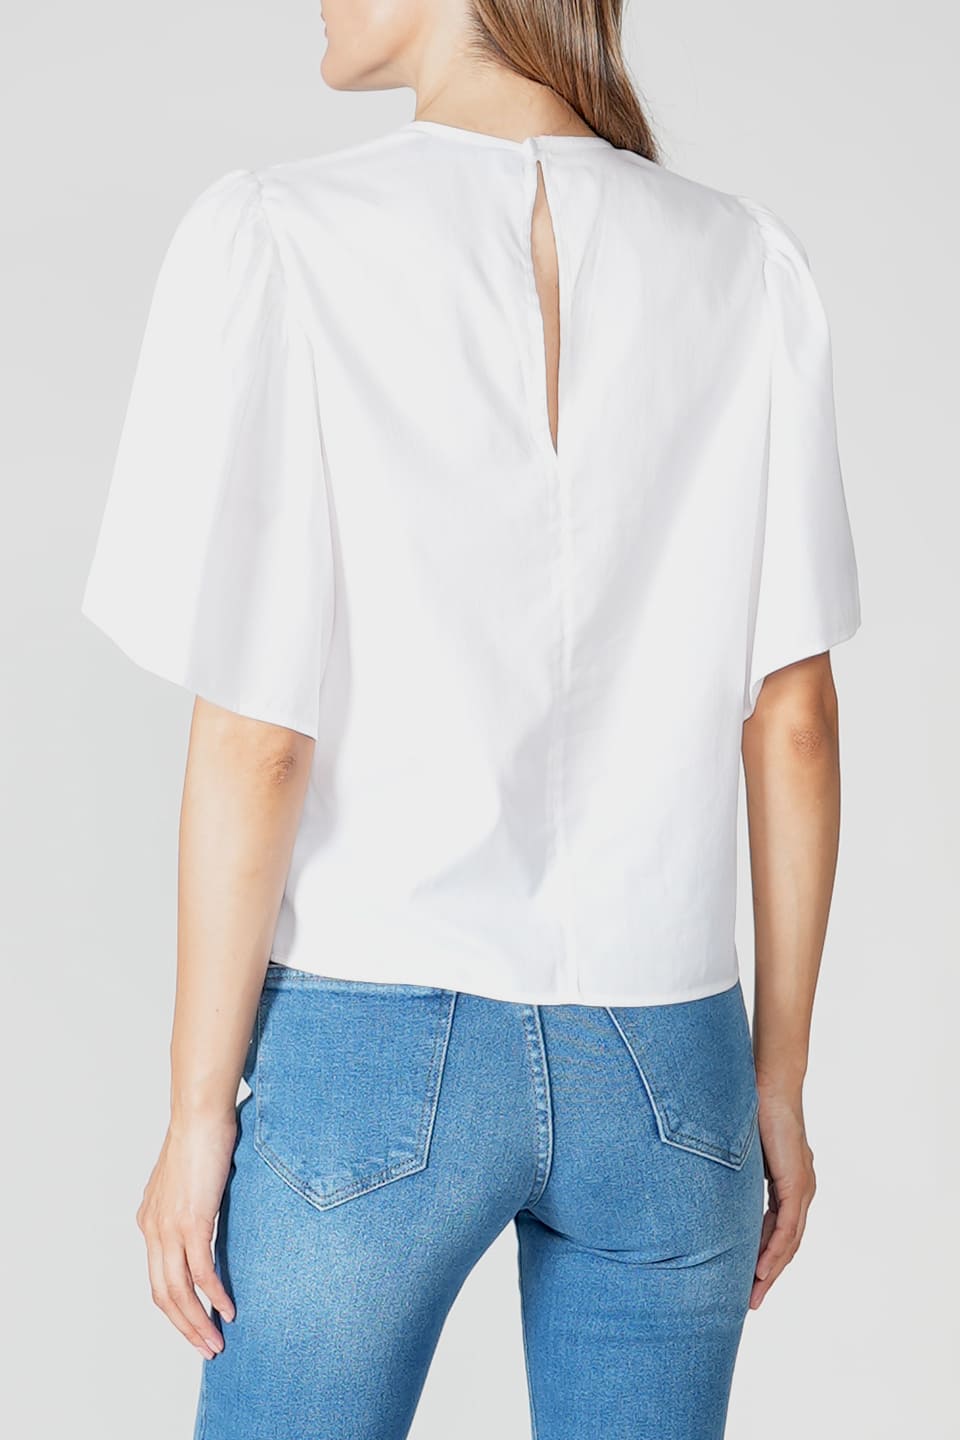 Designer White Women short sleeve, shop online with free delivery in UAE. Product gallery 4